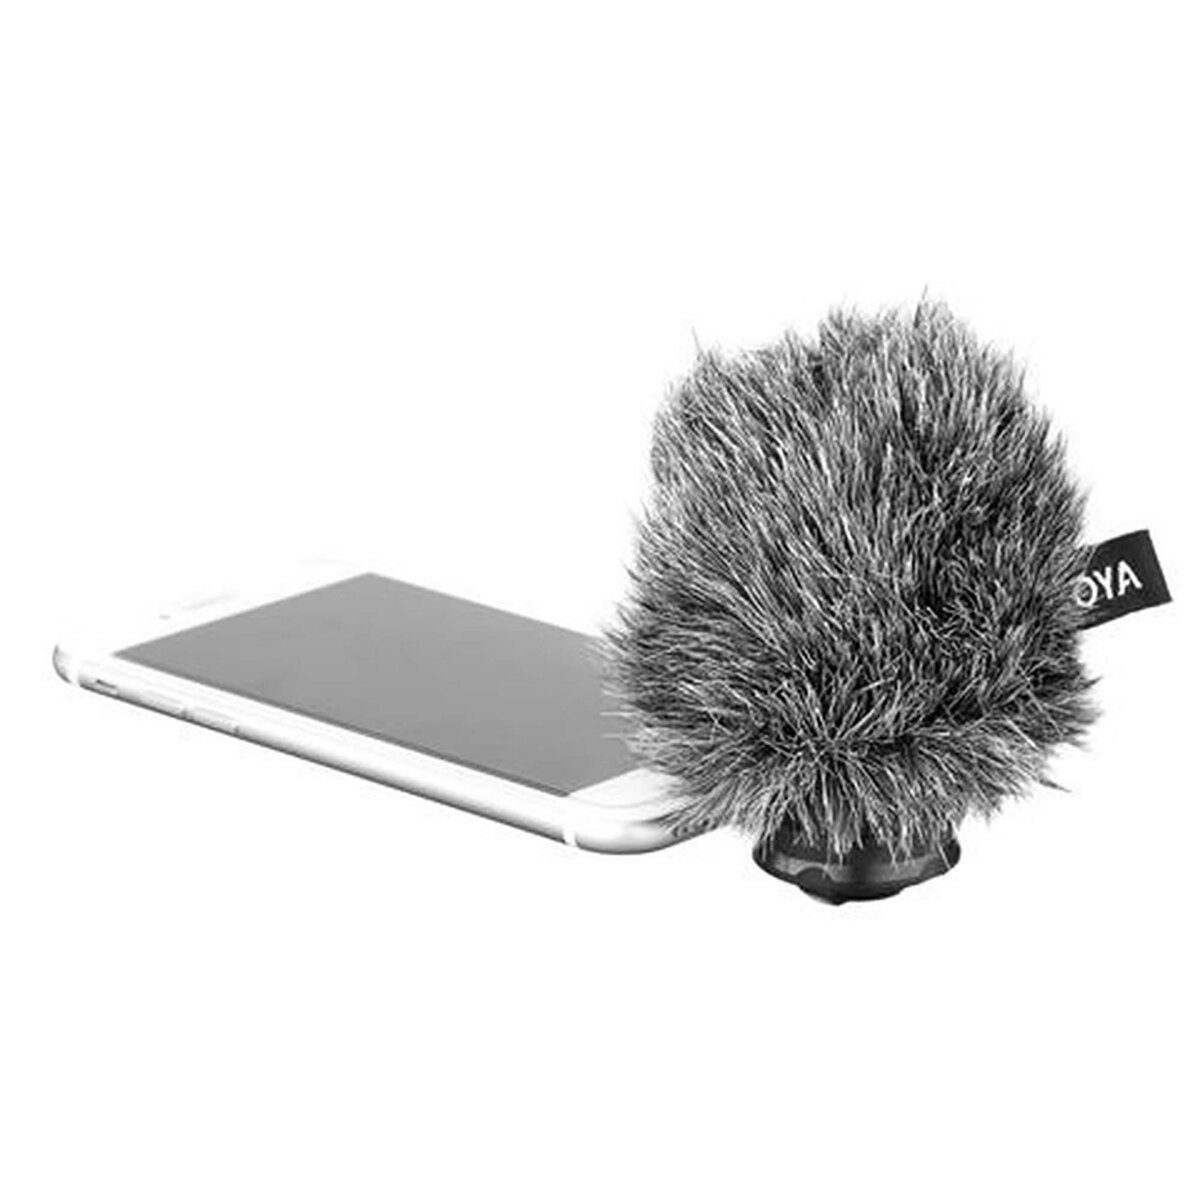 Boya Plug In Smartphone Microphones For iOS devices BY-DM200